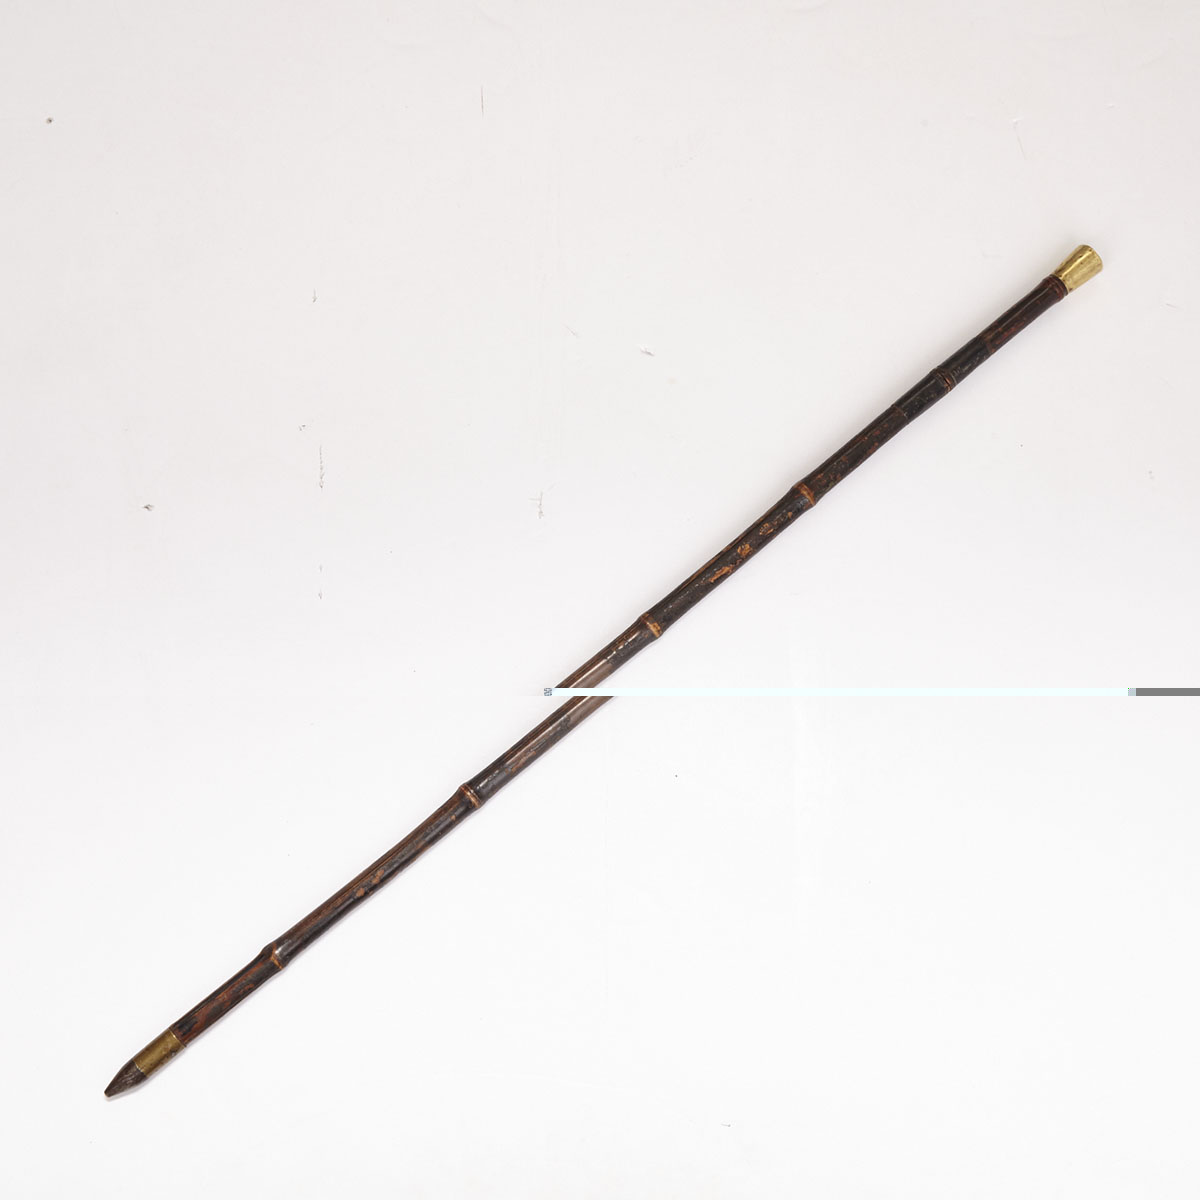 Victorian Brass Mounted Bamboo Sword Gadget Cane, 19th century